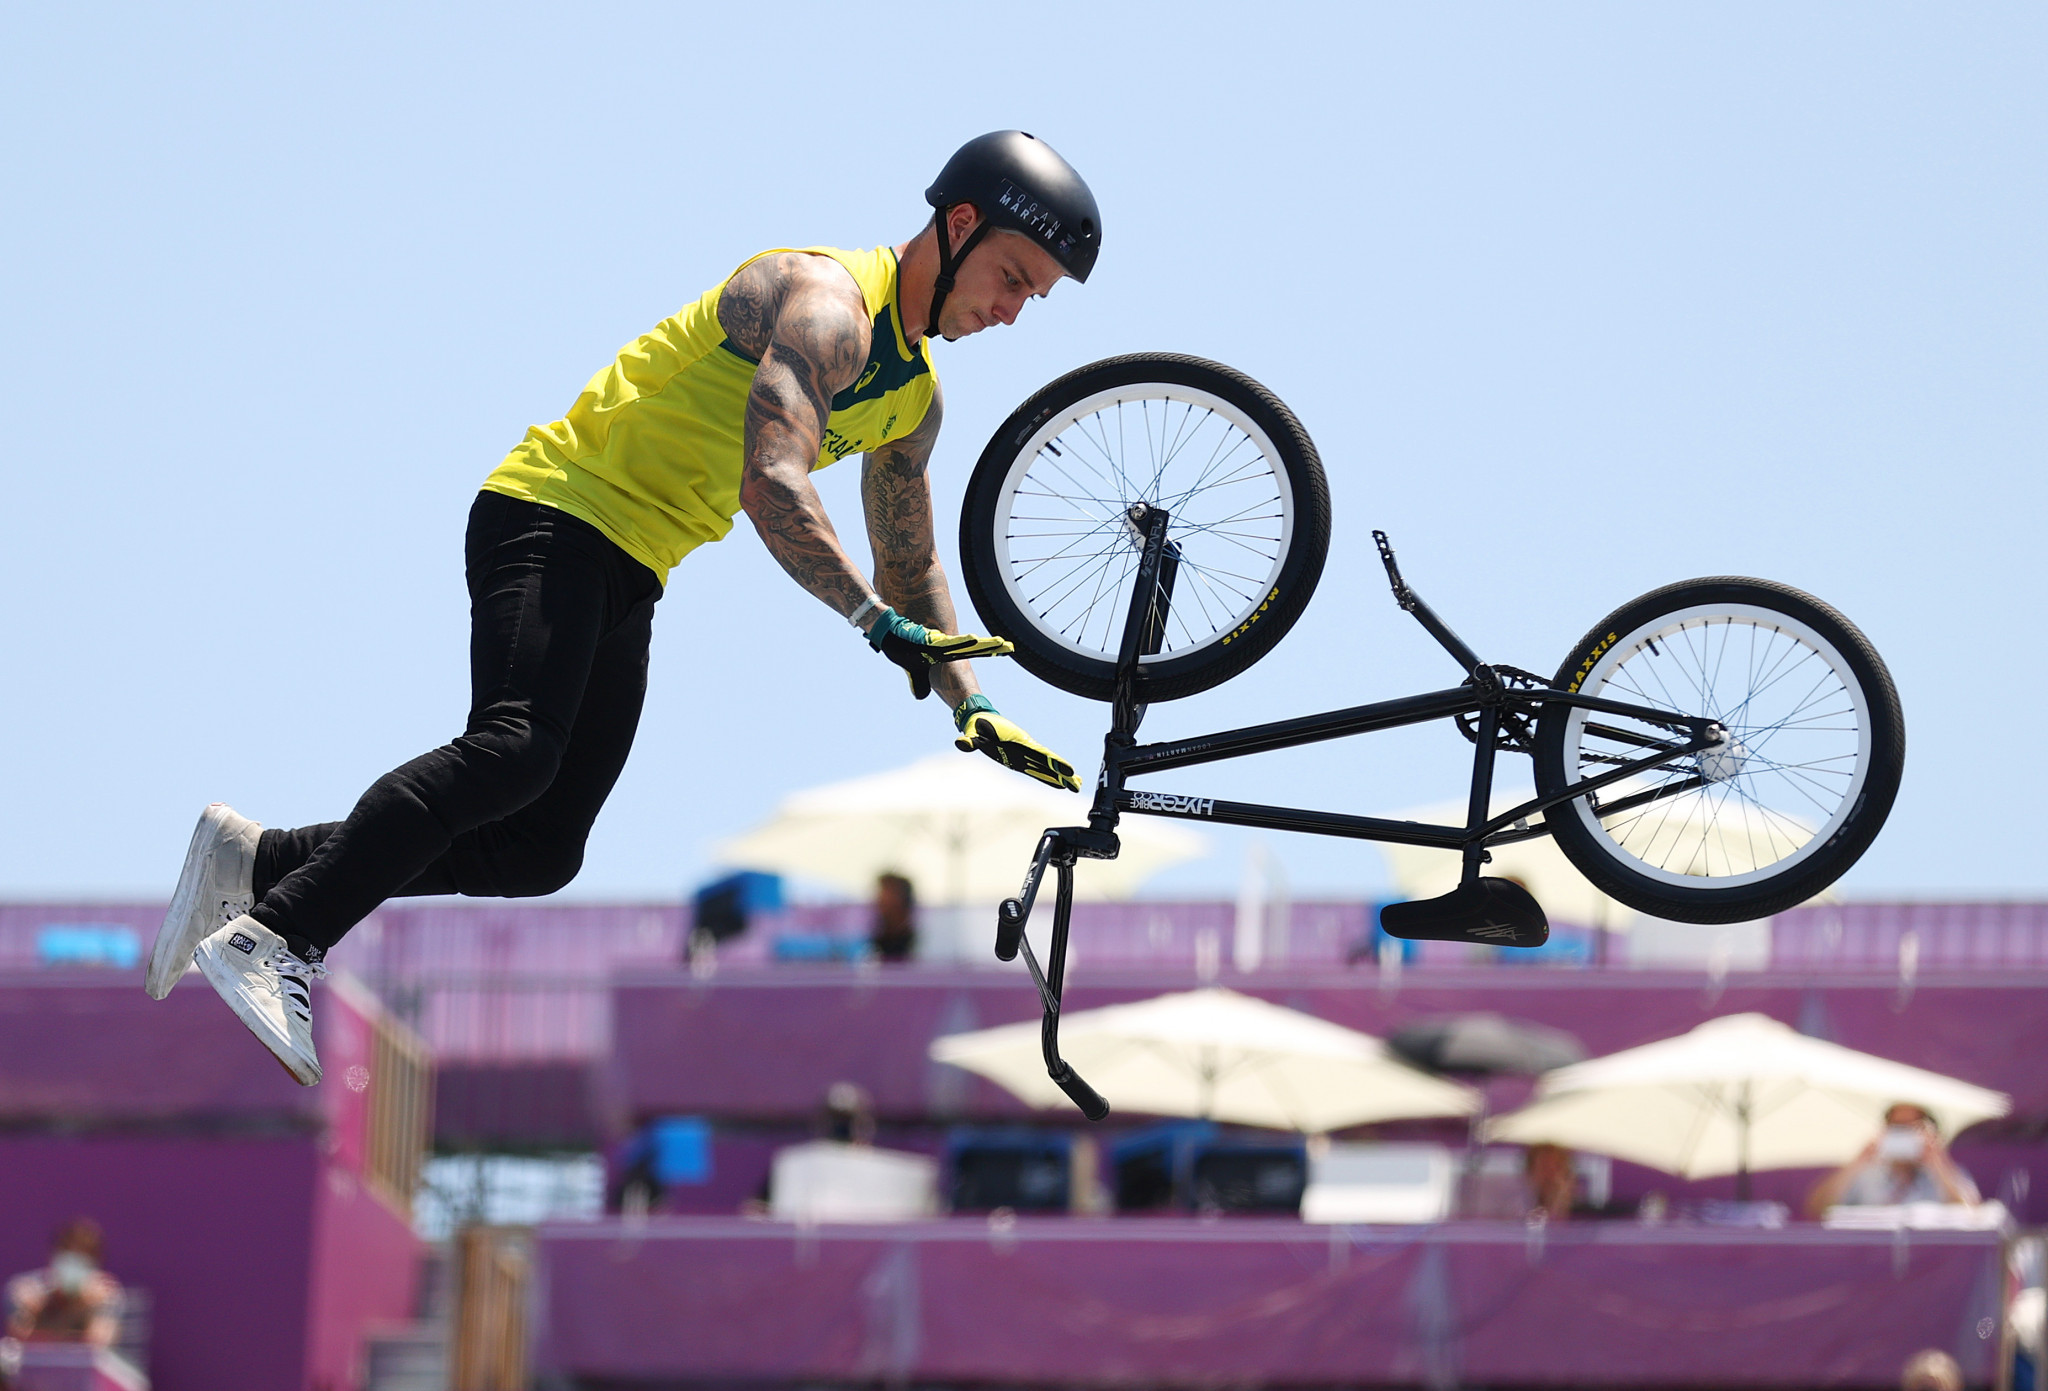 Logan Martin, who won gold at the BMX freestyle at Tokyo 2020, will be aiming to boost his X Games medal tally in Chiba ©Getty Images